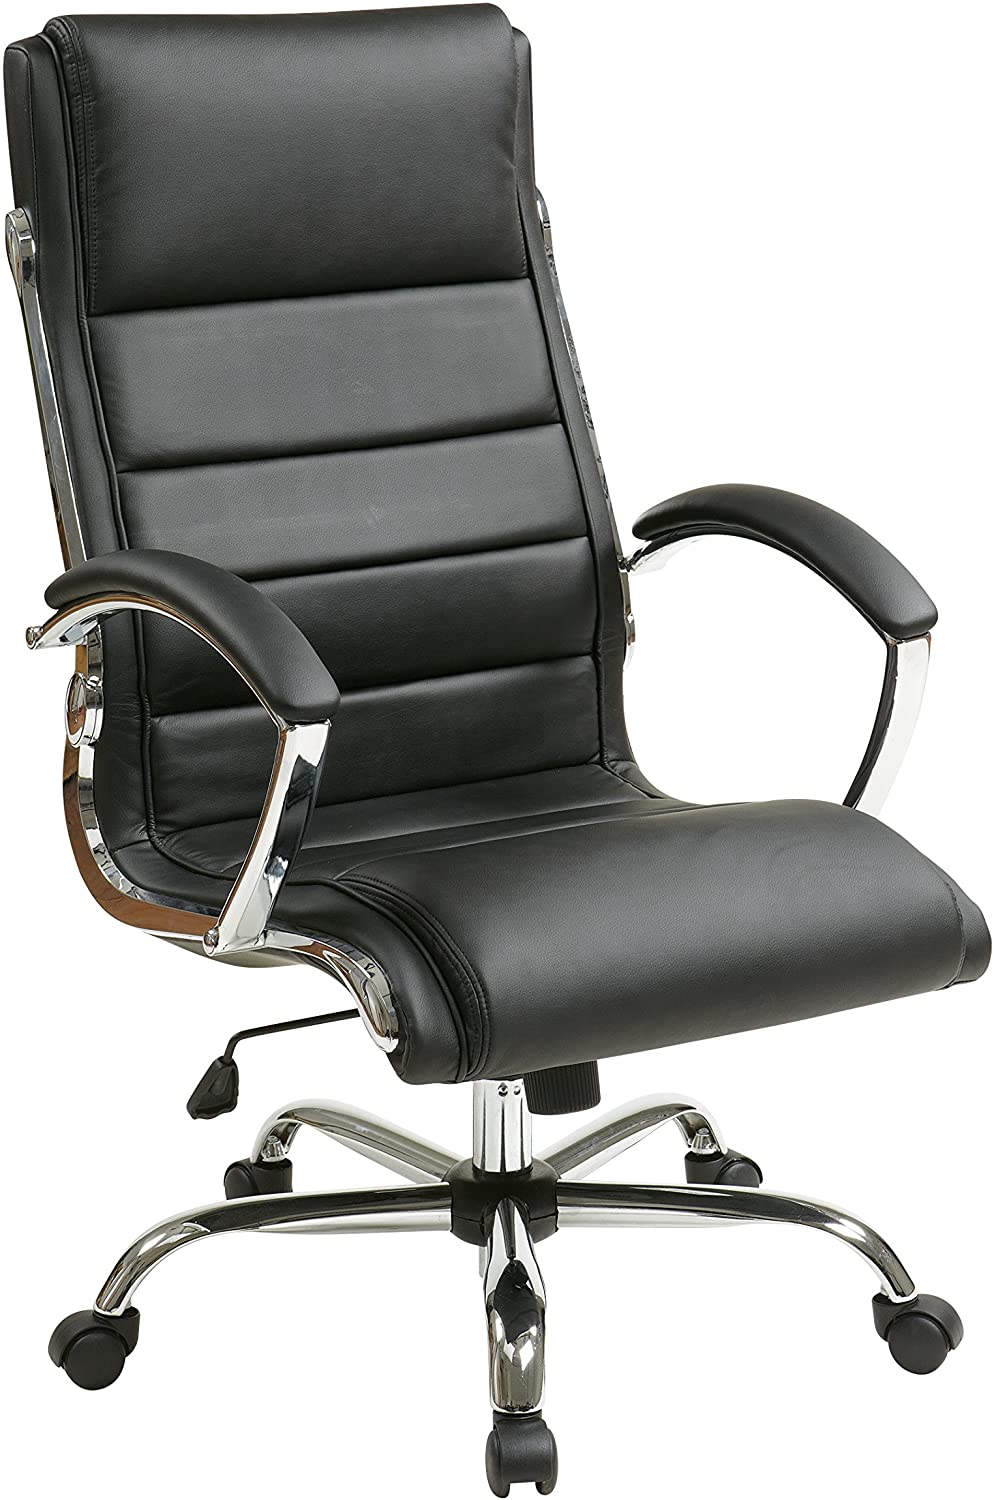 White Executive Chair at Desk